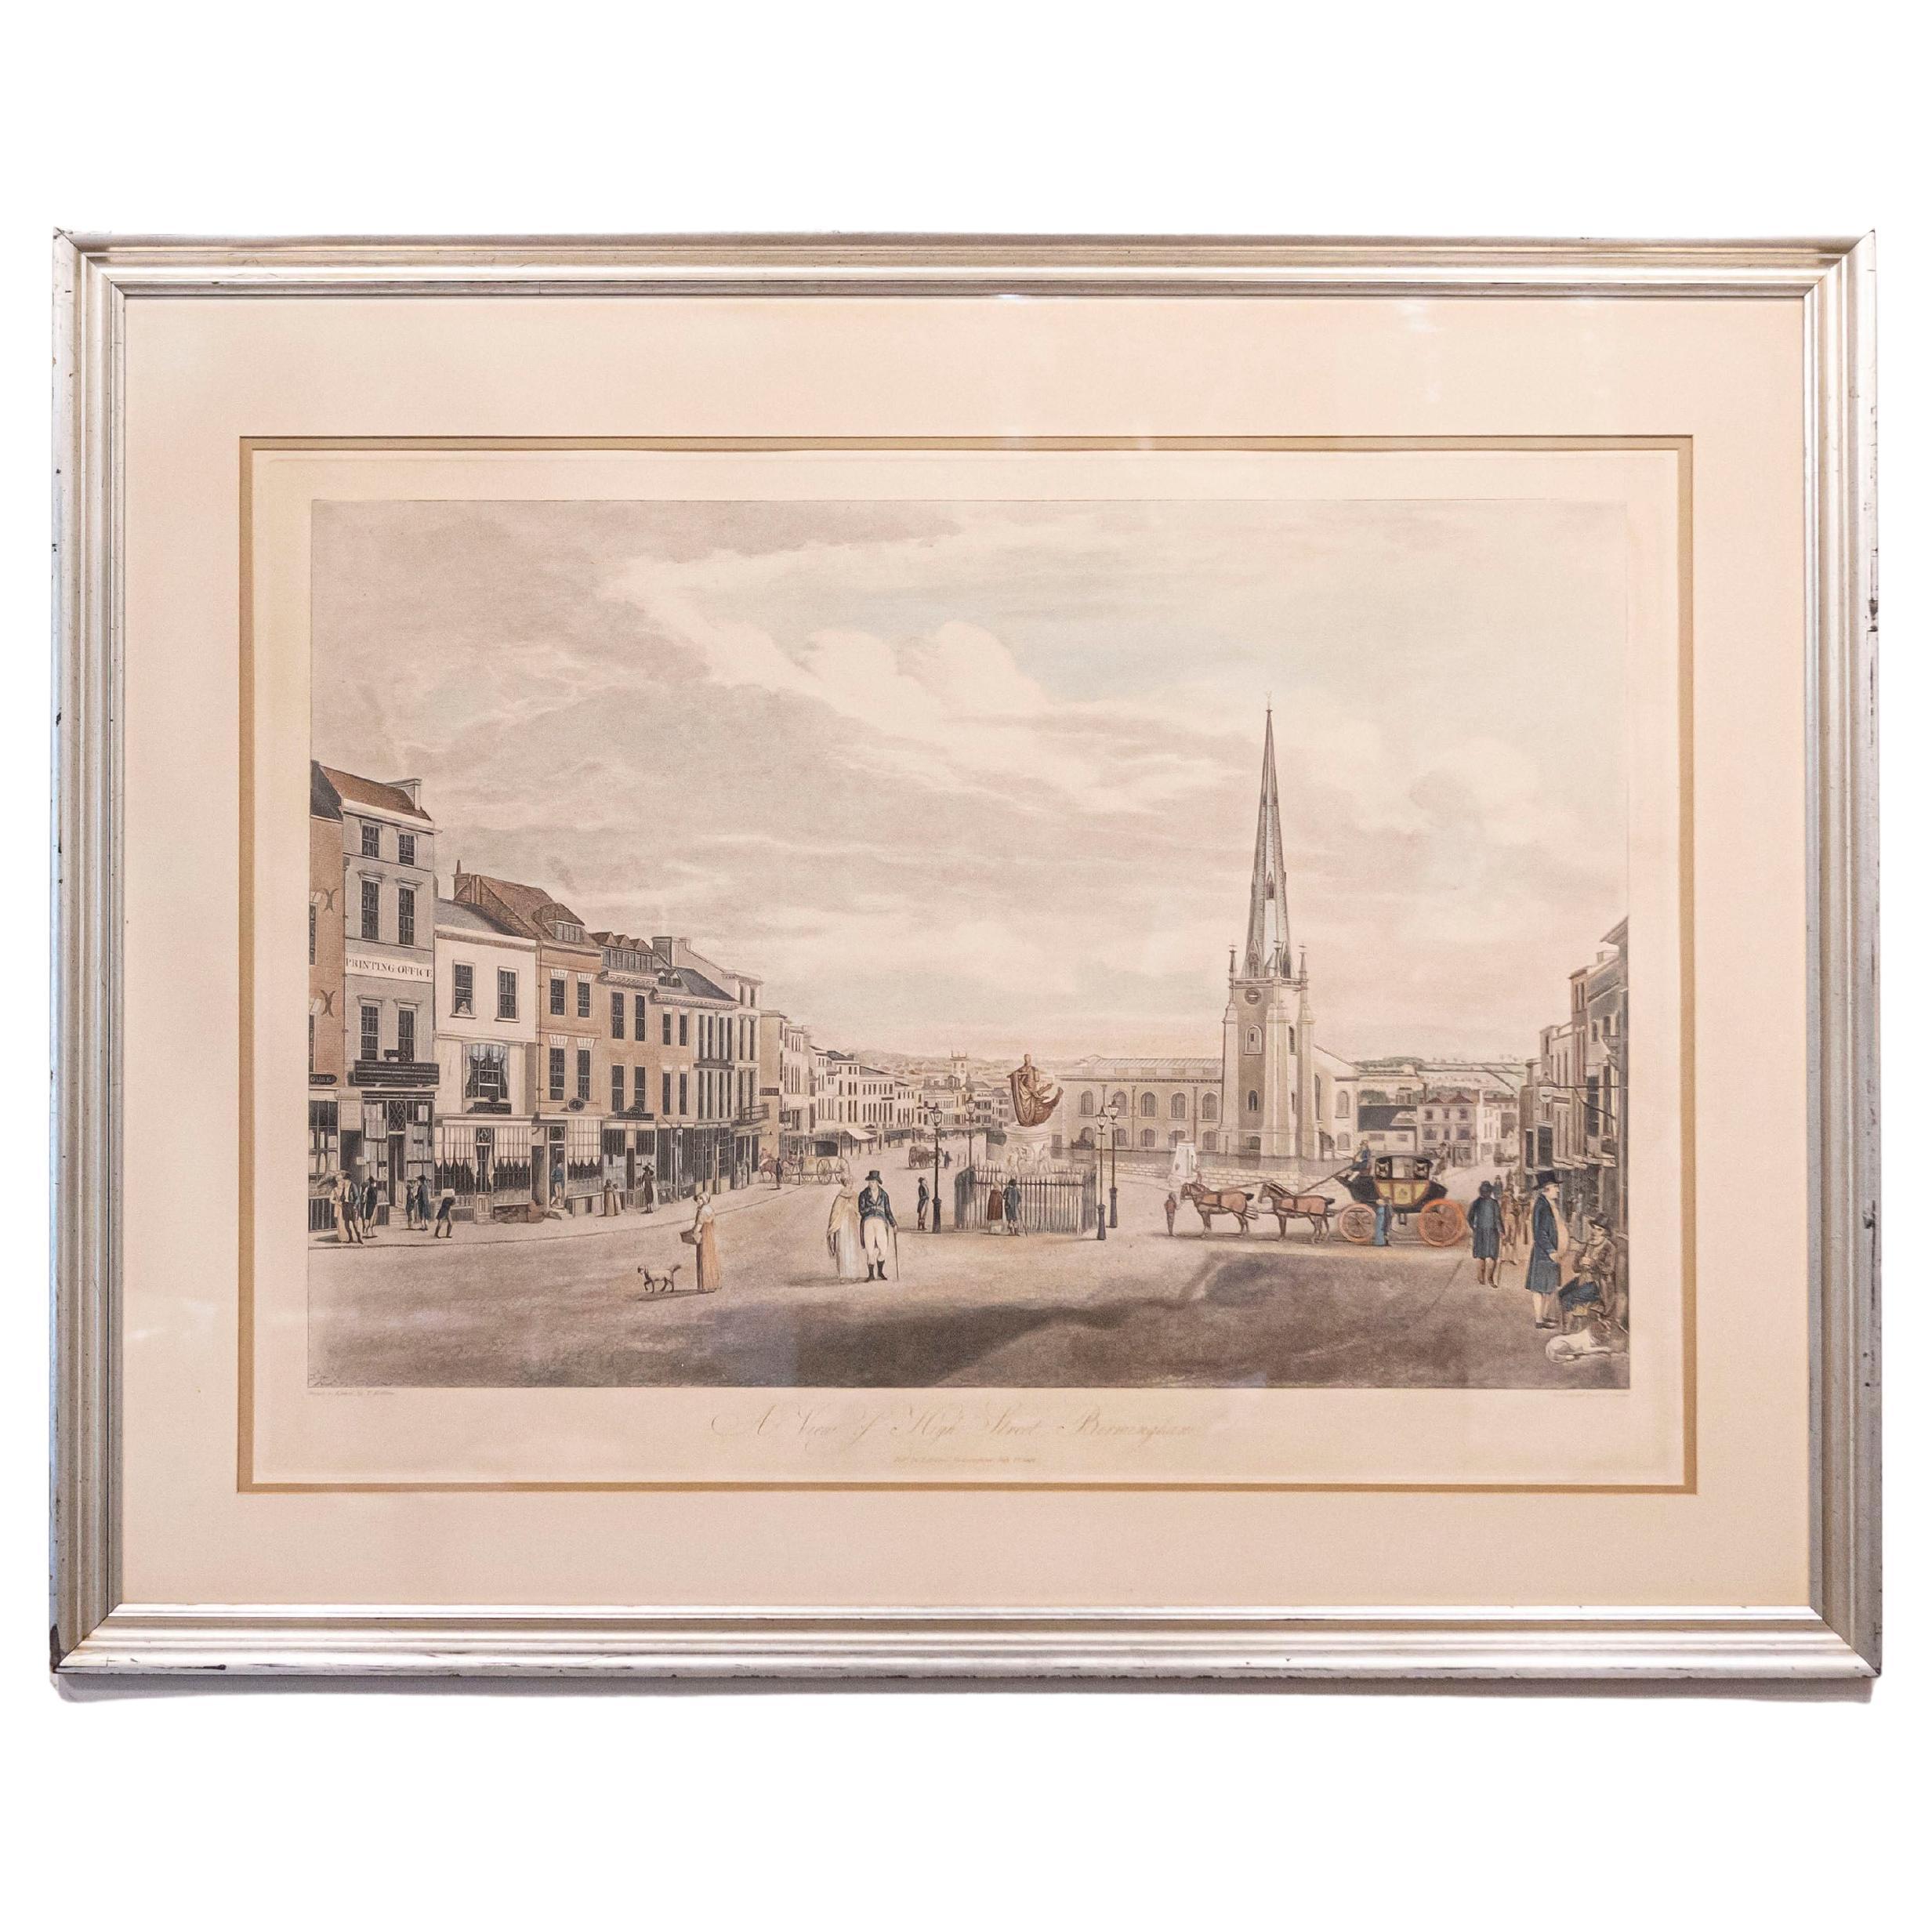 View of High Street Birmingham, 1810s Framed Lithograph Signed T. Hollins